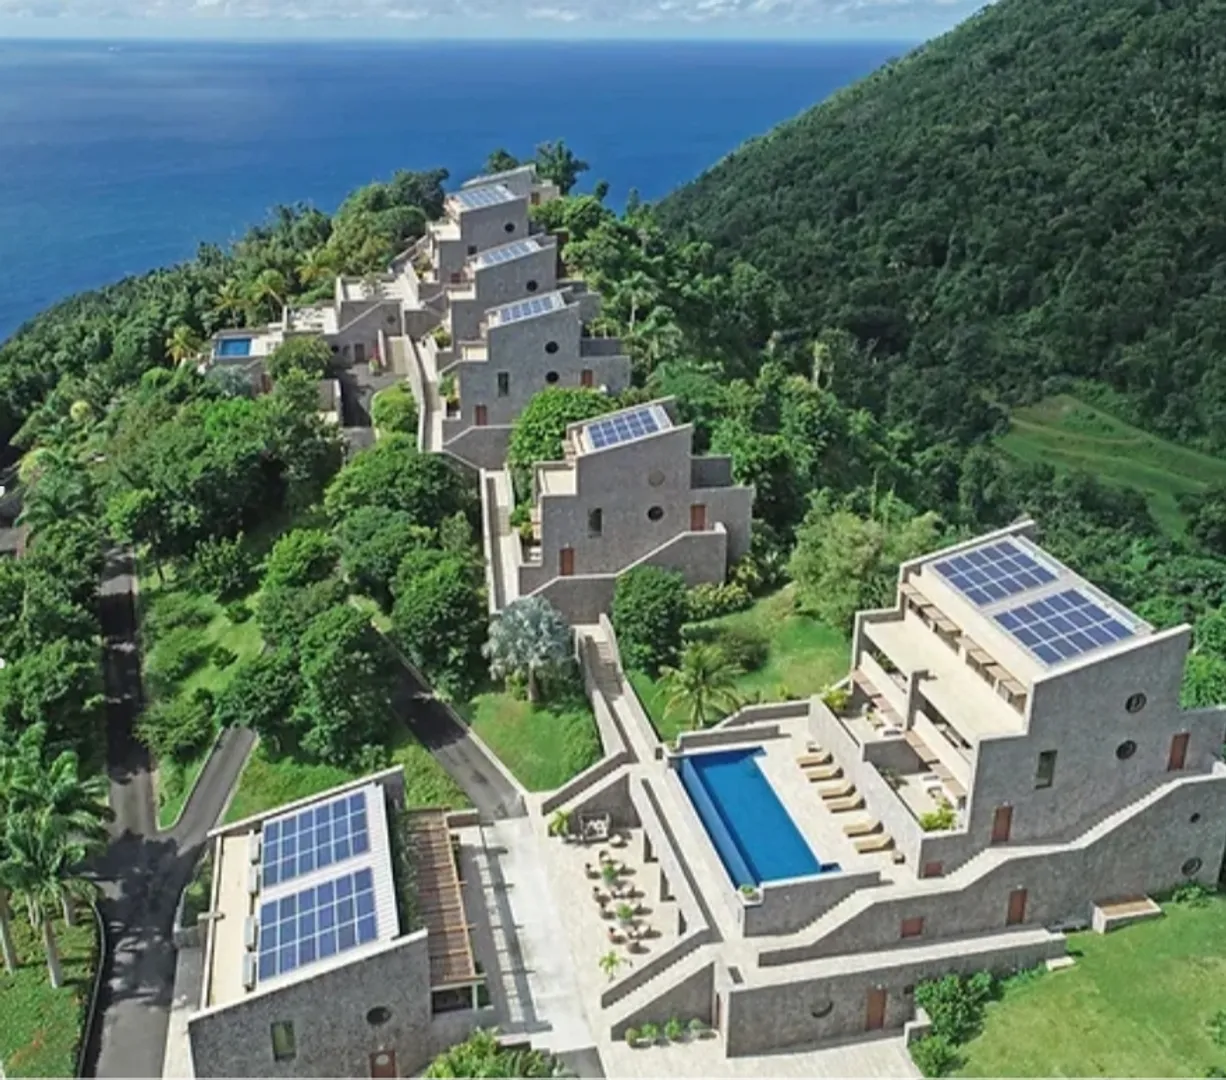 I think it's so cool that this hotel's main power source is solar power, and they use recycled rainwater for the pools

#dominica #luxurytravel #sustainabilitytravel #luxurysustainability #luxurycaribbean #luxurytraveladvisor